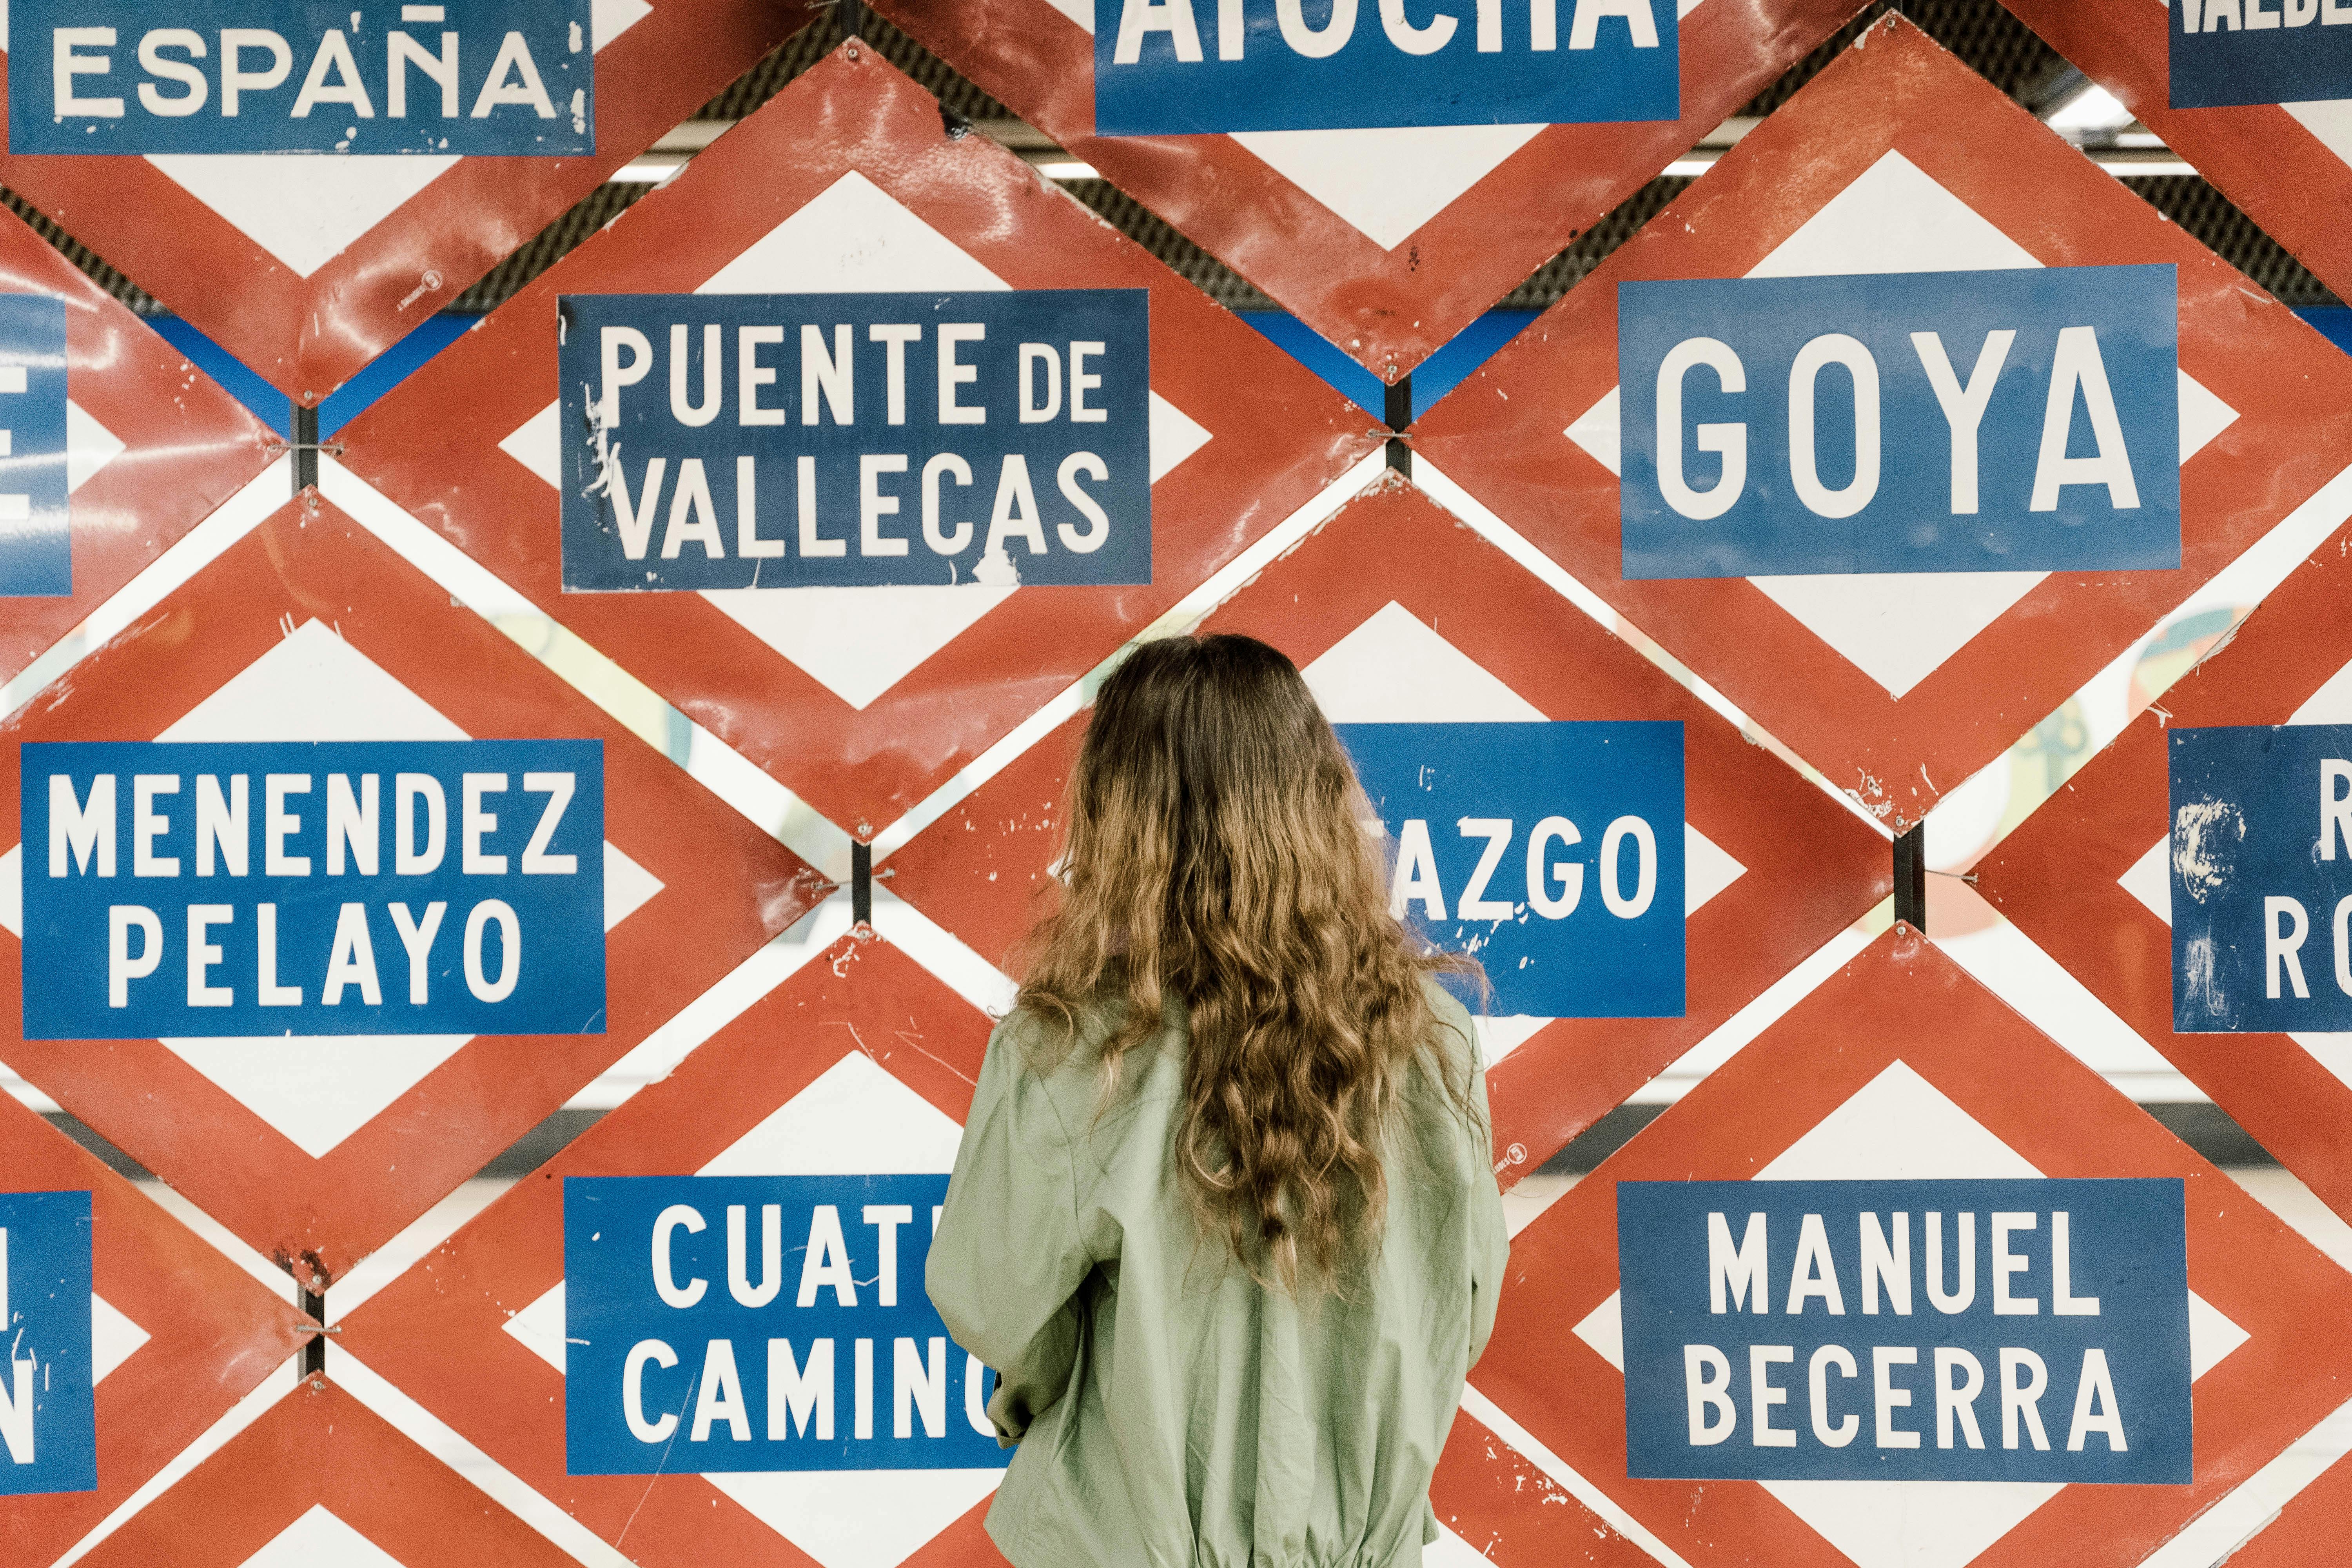 woman looking at a tourism themed billboard in madrid spain